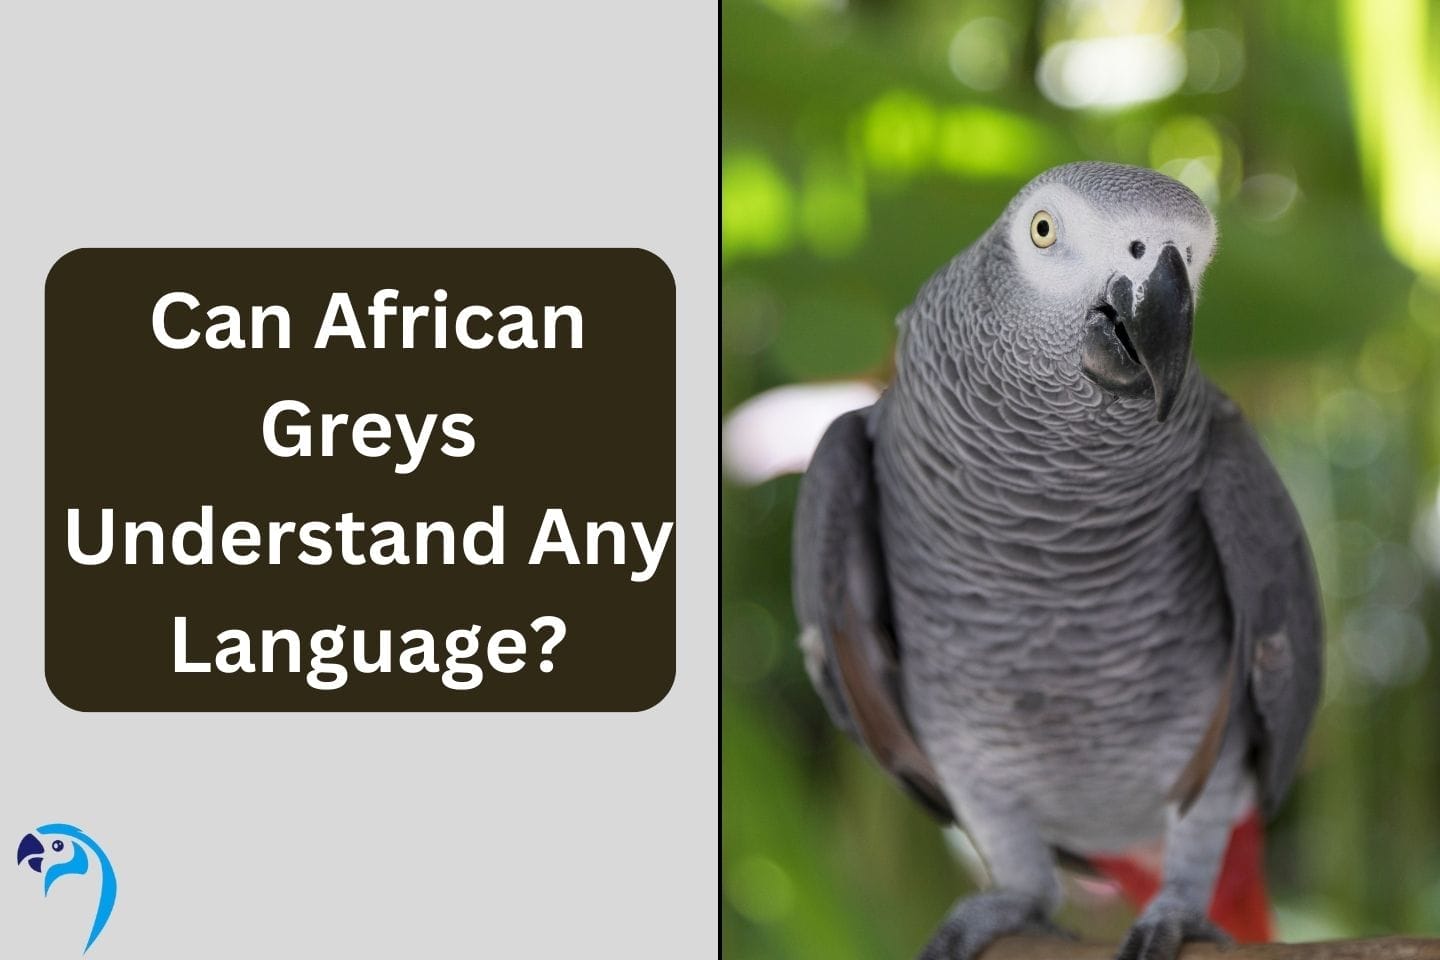 Can African Greys Understand Any Language? Their Intelligence Compared to Humans